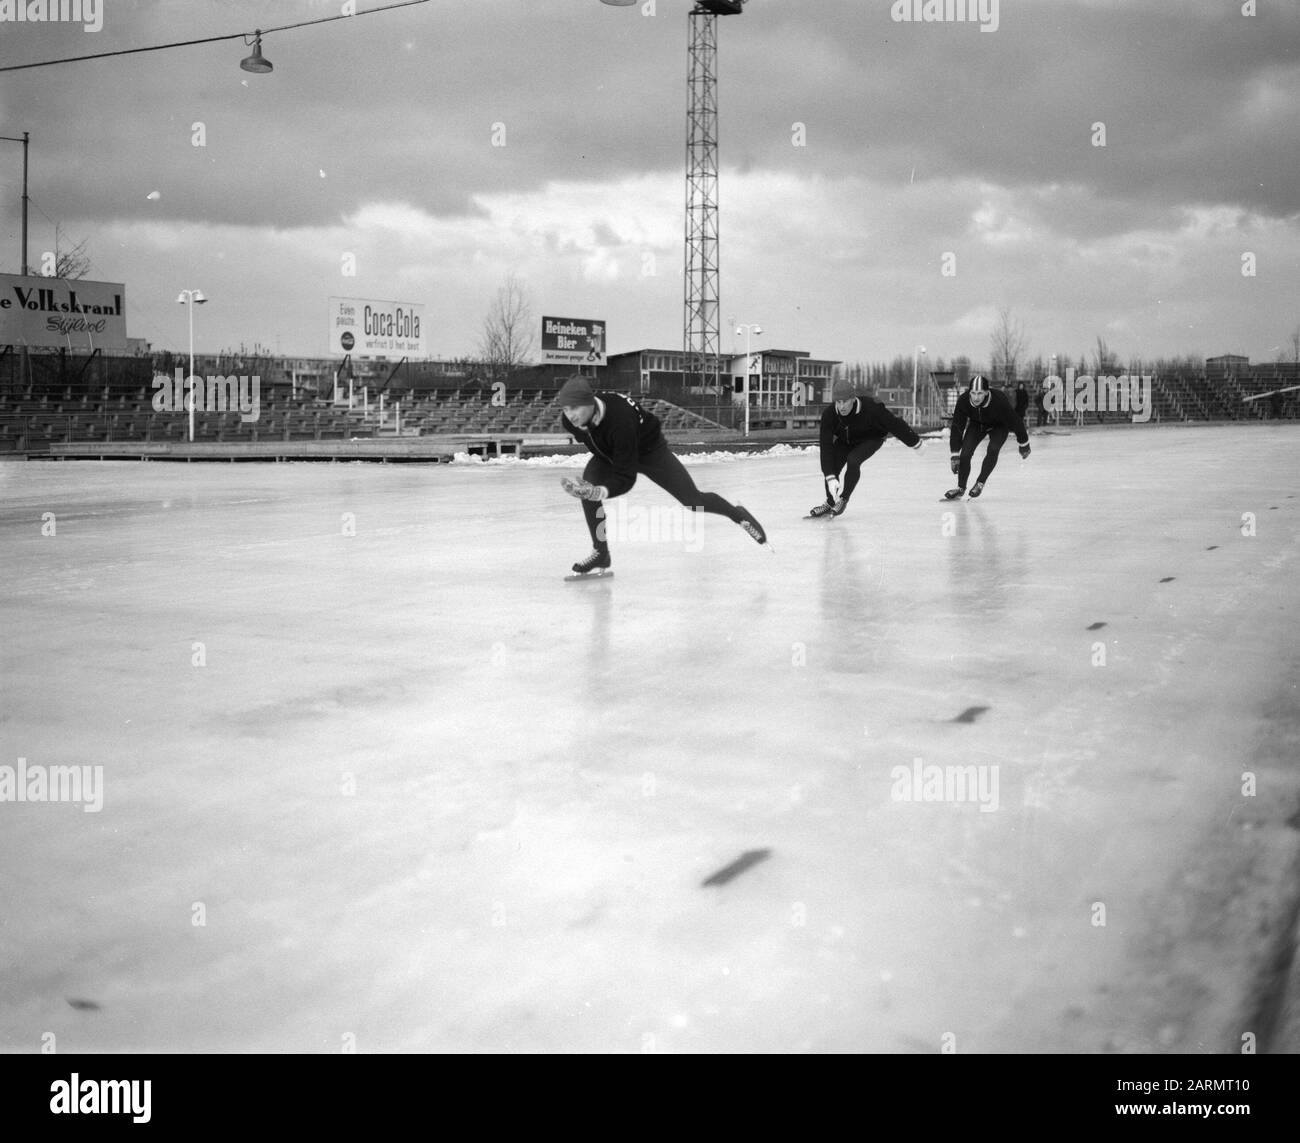 Netherlands sprint Black and White Stock Photos & Images - Alamy